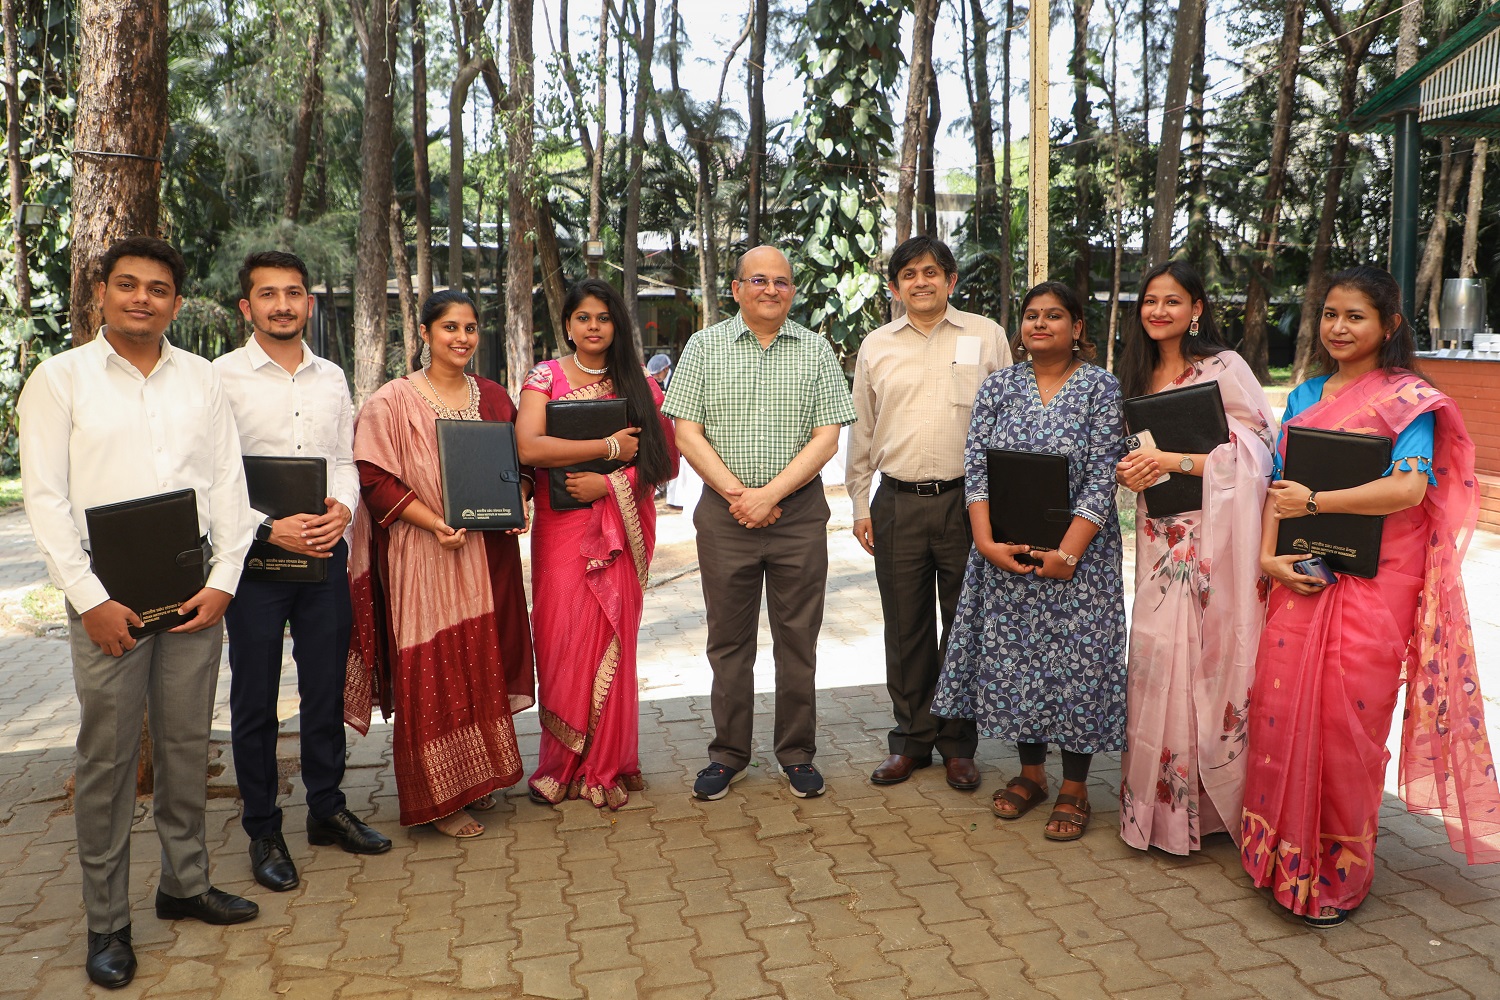 Prof. Rishikesha T Krishnan, Director, IIMB, and Prof. Anil B Suraj, Chairperson, N.S. Ramaswamy Pre-doctoral Programme, IIMB, with the Pre-doc students of 2022-23 at their farewell on 28th March 2023.